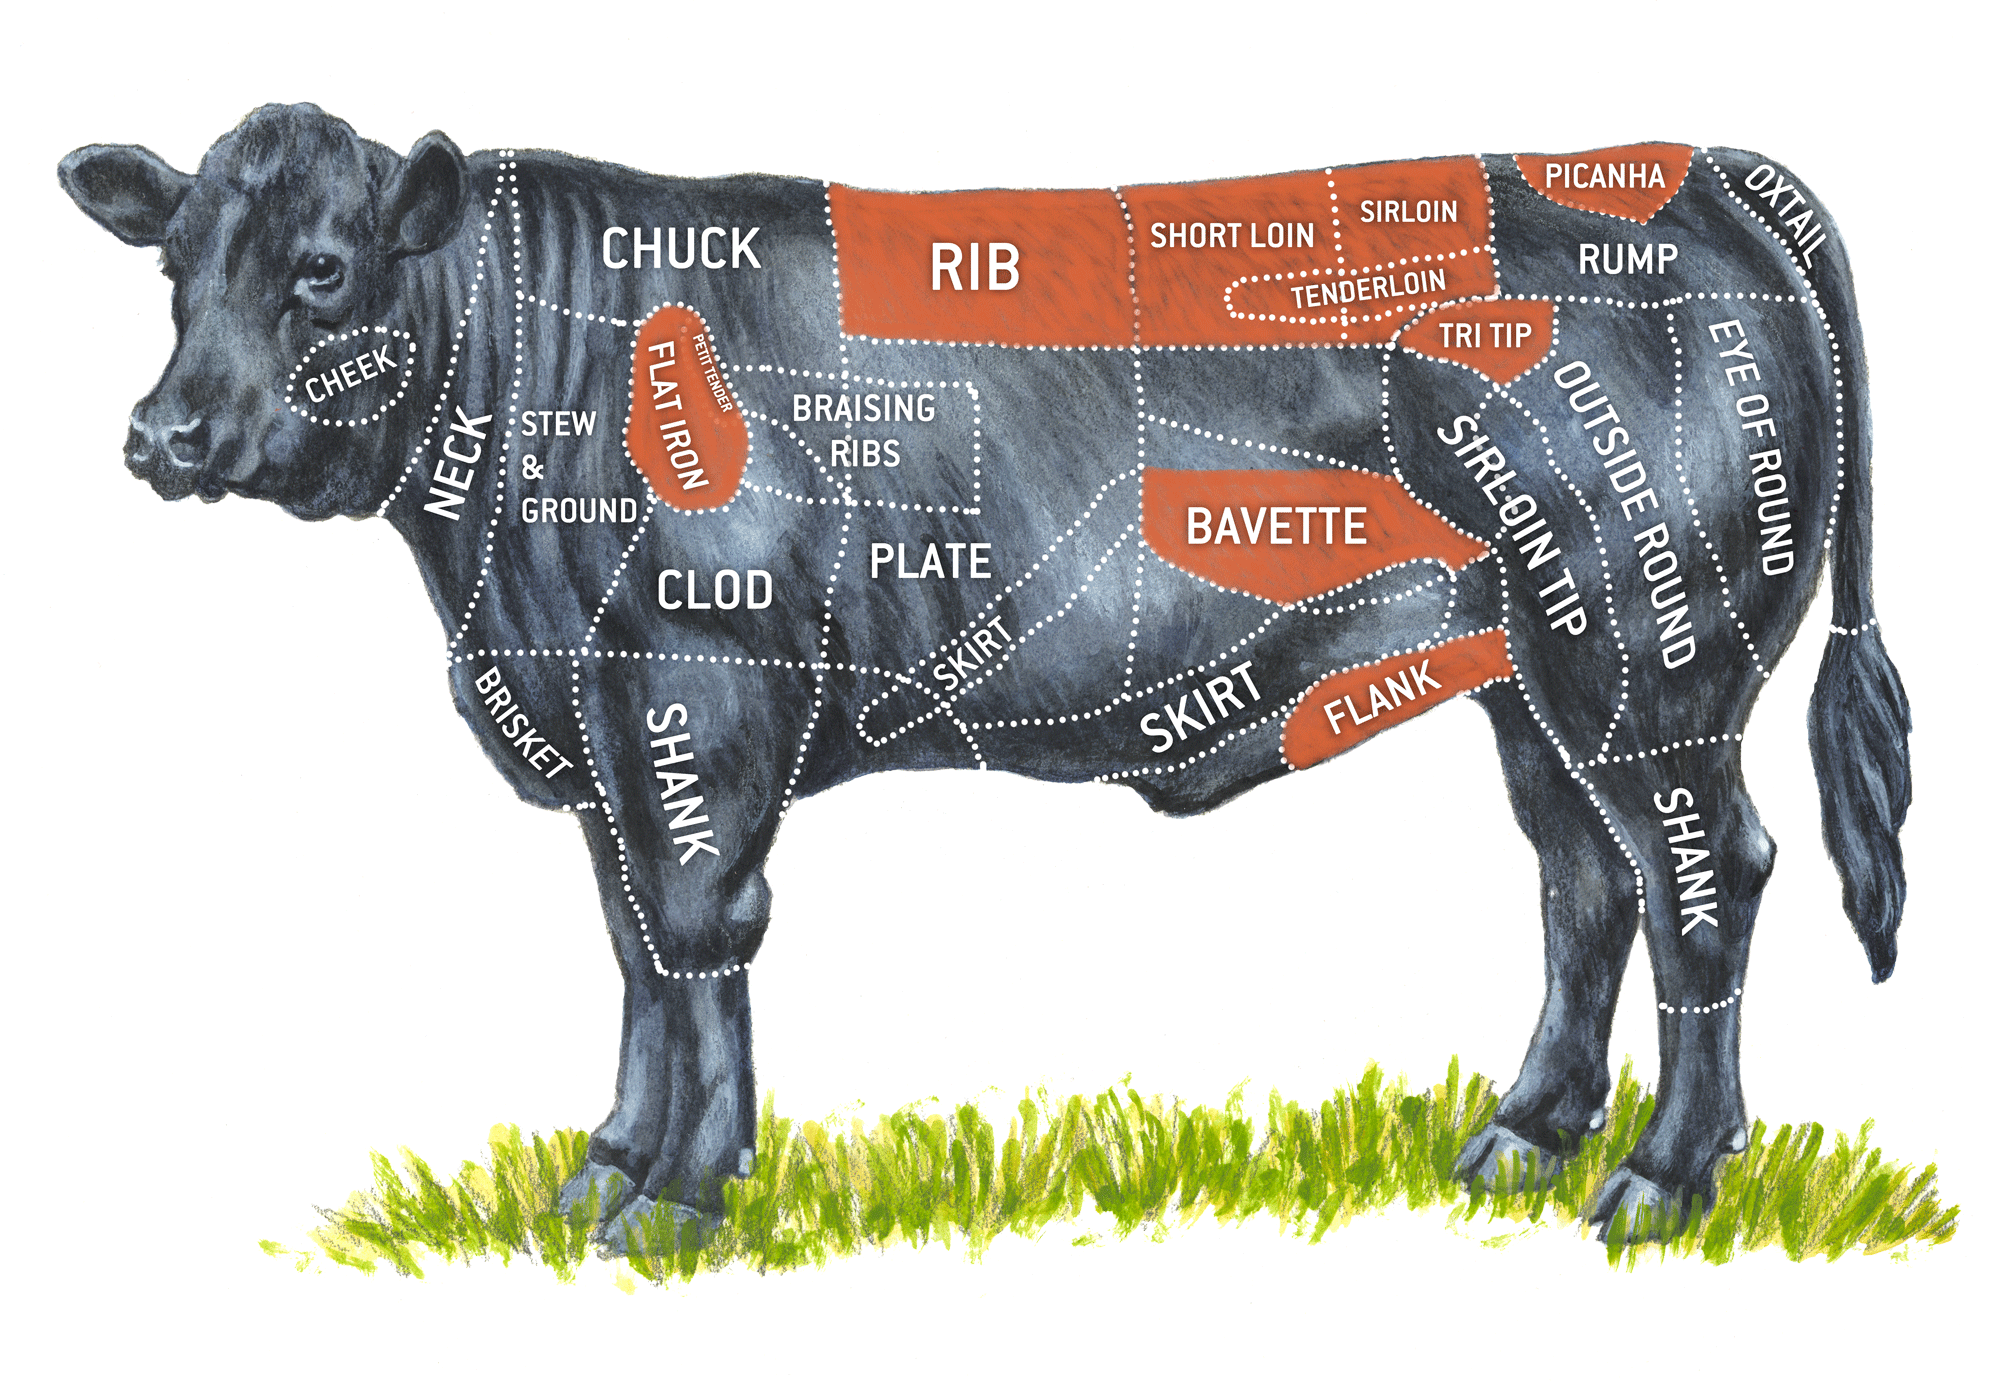 A Guide to All the Cuts of Beef